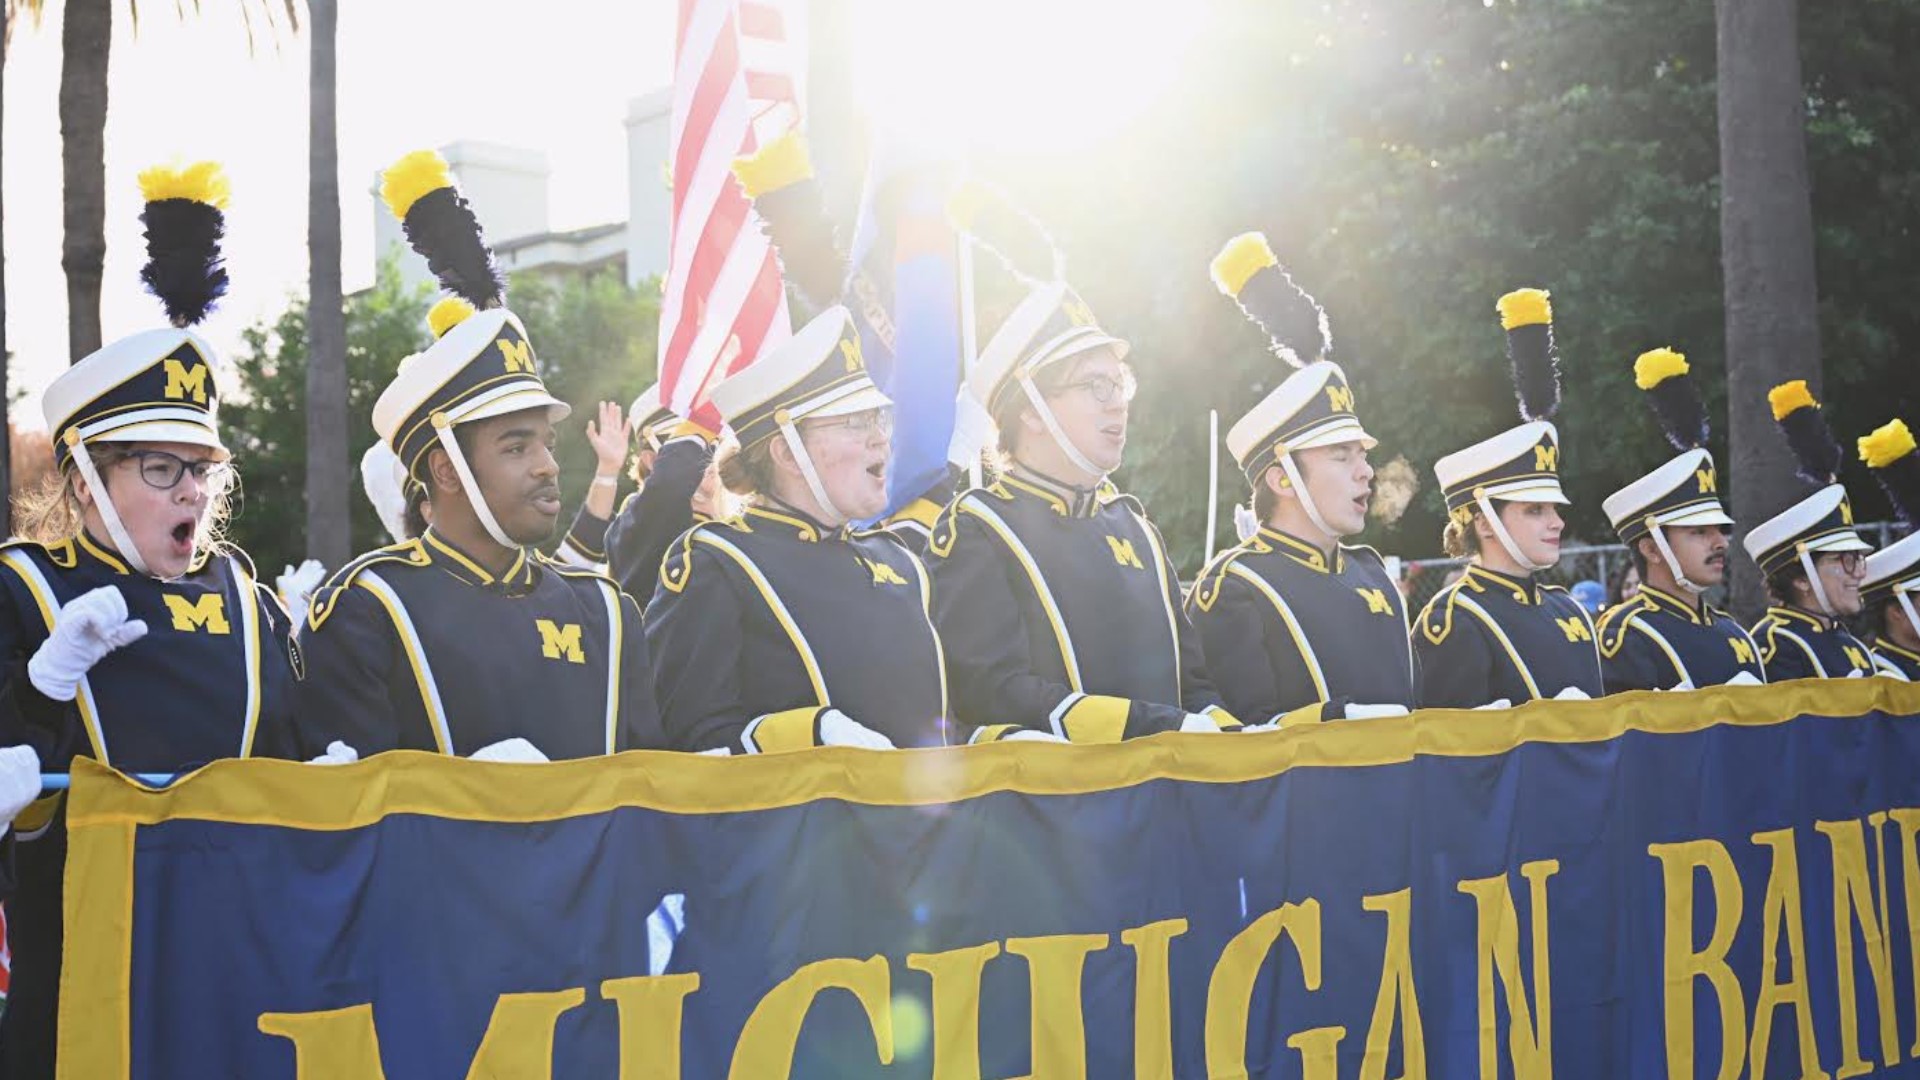 The band came to Pasadena, California to celebrate the No. 1 Wolverines appearance in the Rose Bowl.